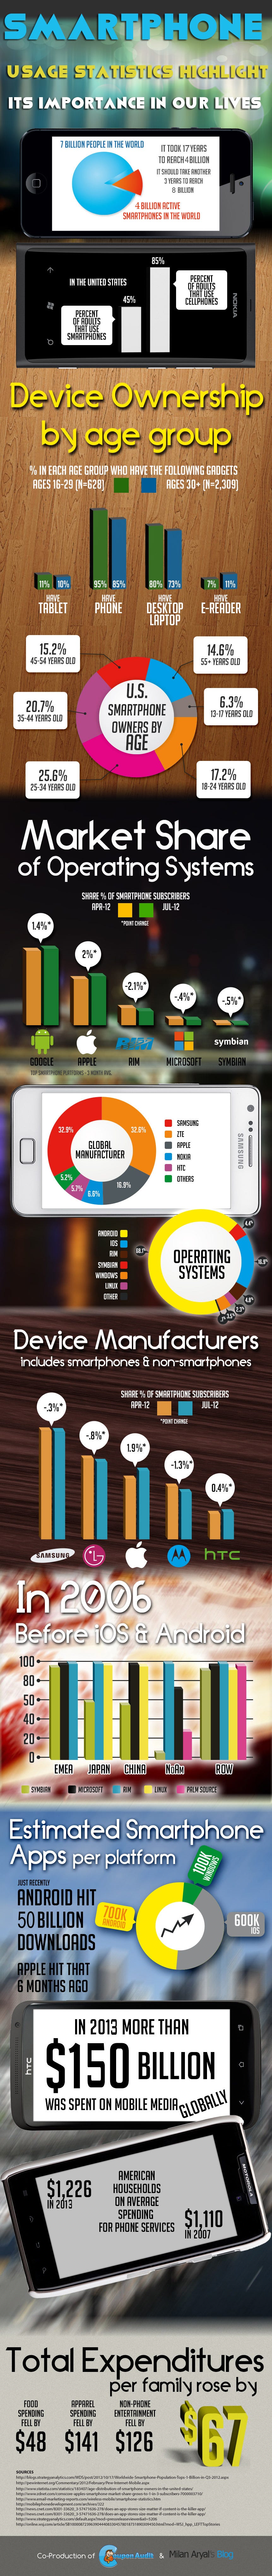 Smartphone Usage Statistics Highlight Its Importance In Our Lives [INFOGRAPHIC]